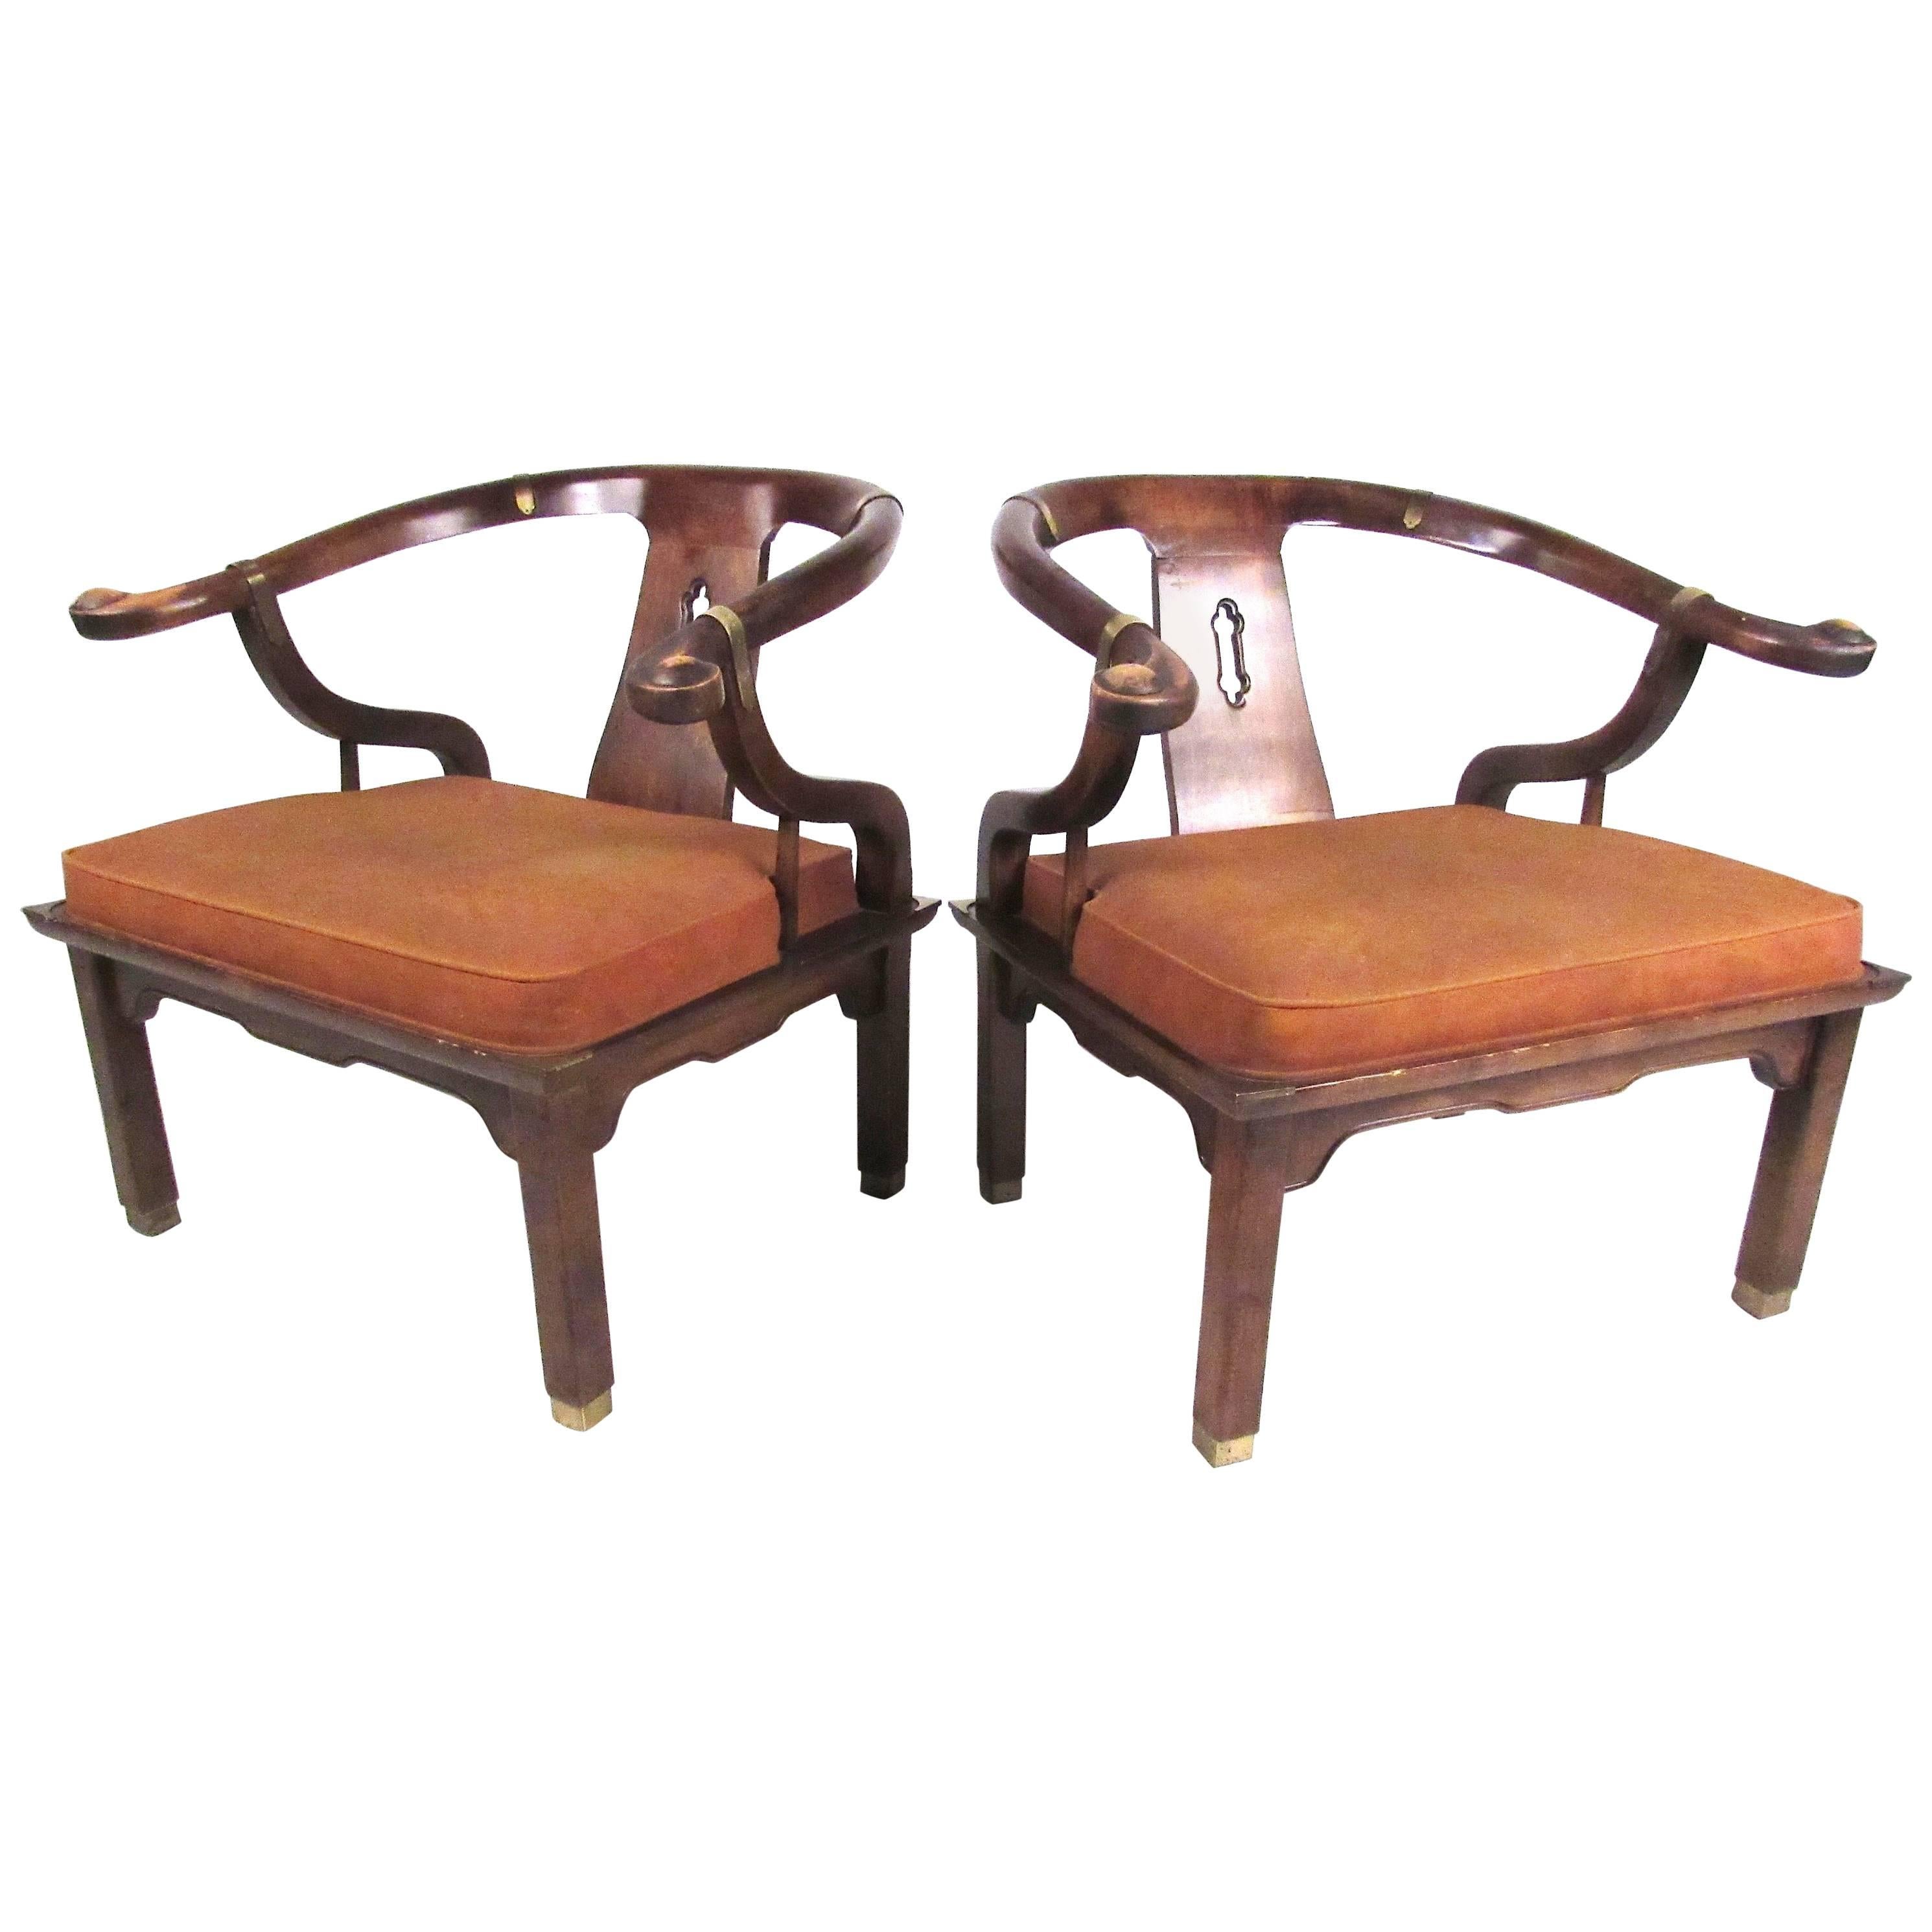 Pair of Chinoiserie Style Lounge Chairs by Century Chair Company